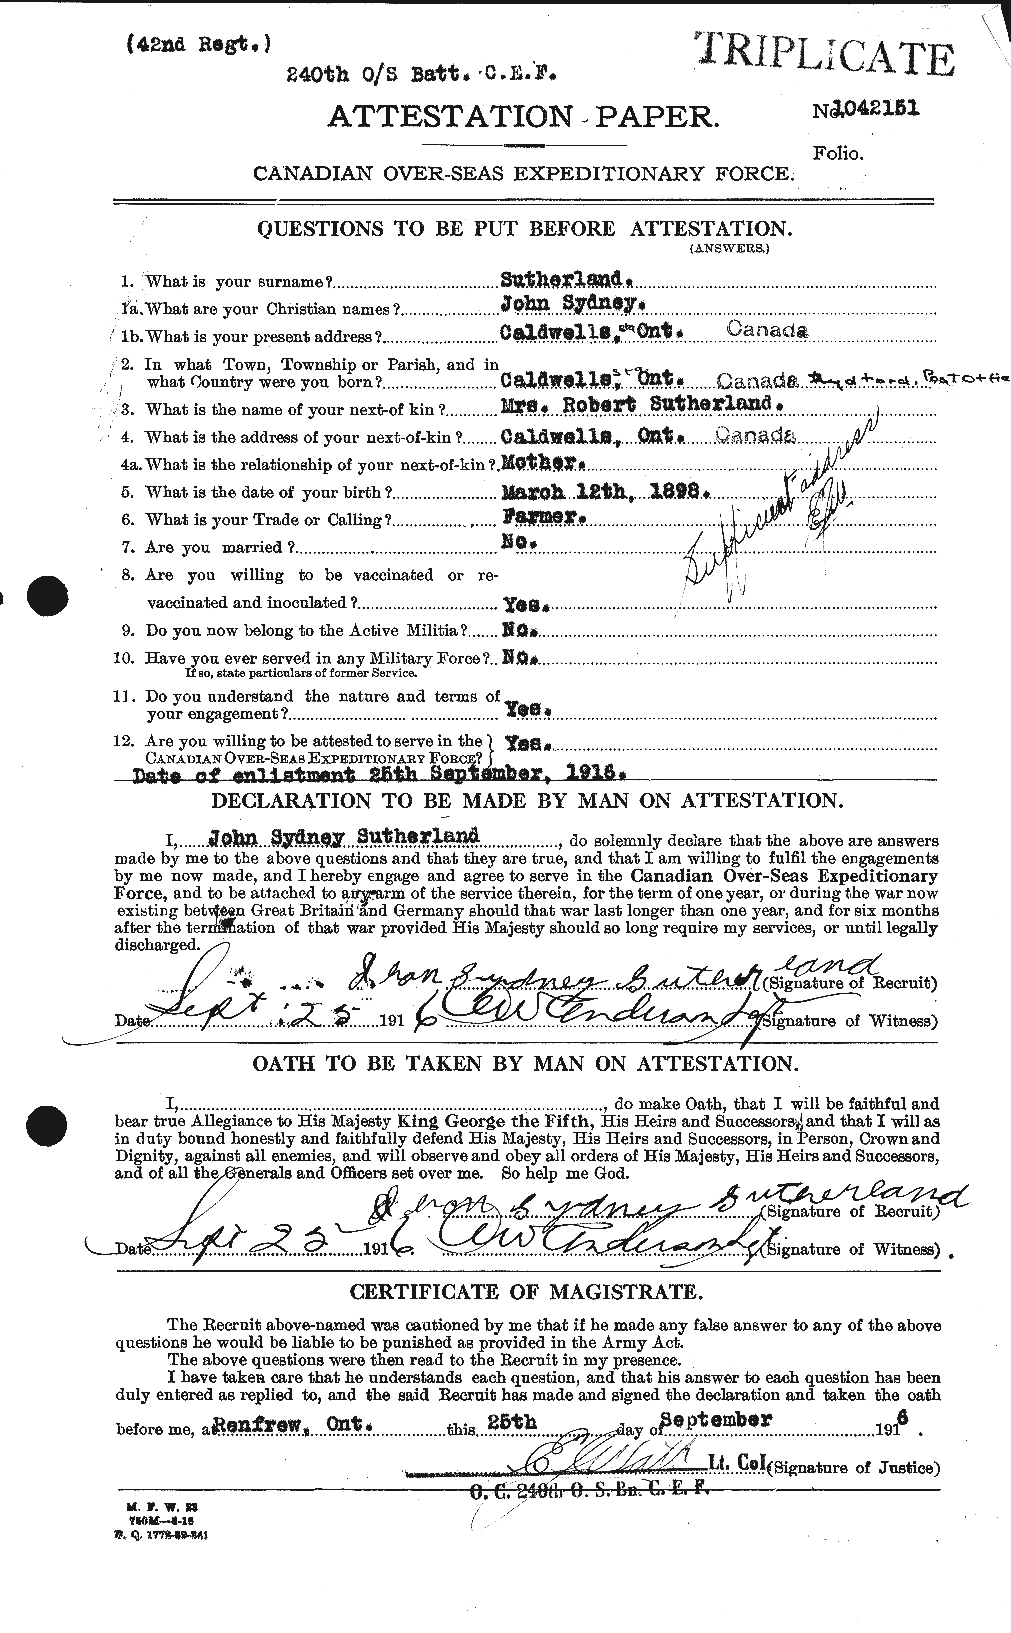 Personnel Records of the First World War - CEF 124456a